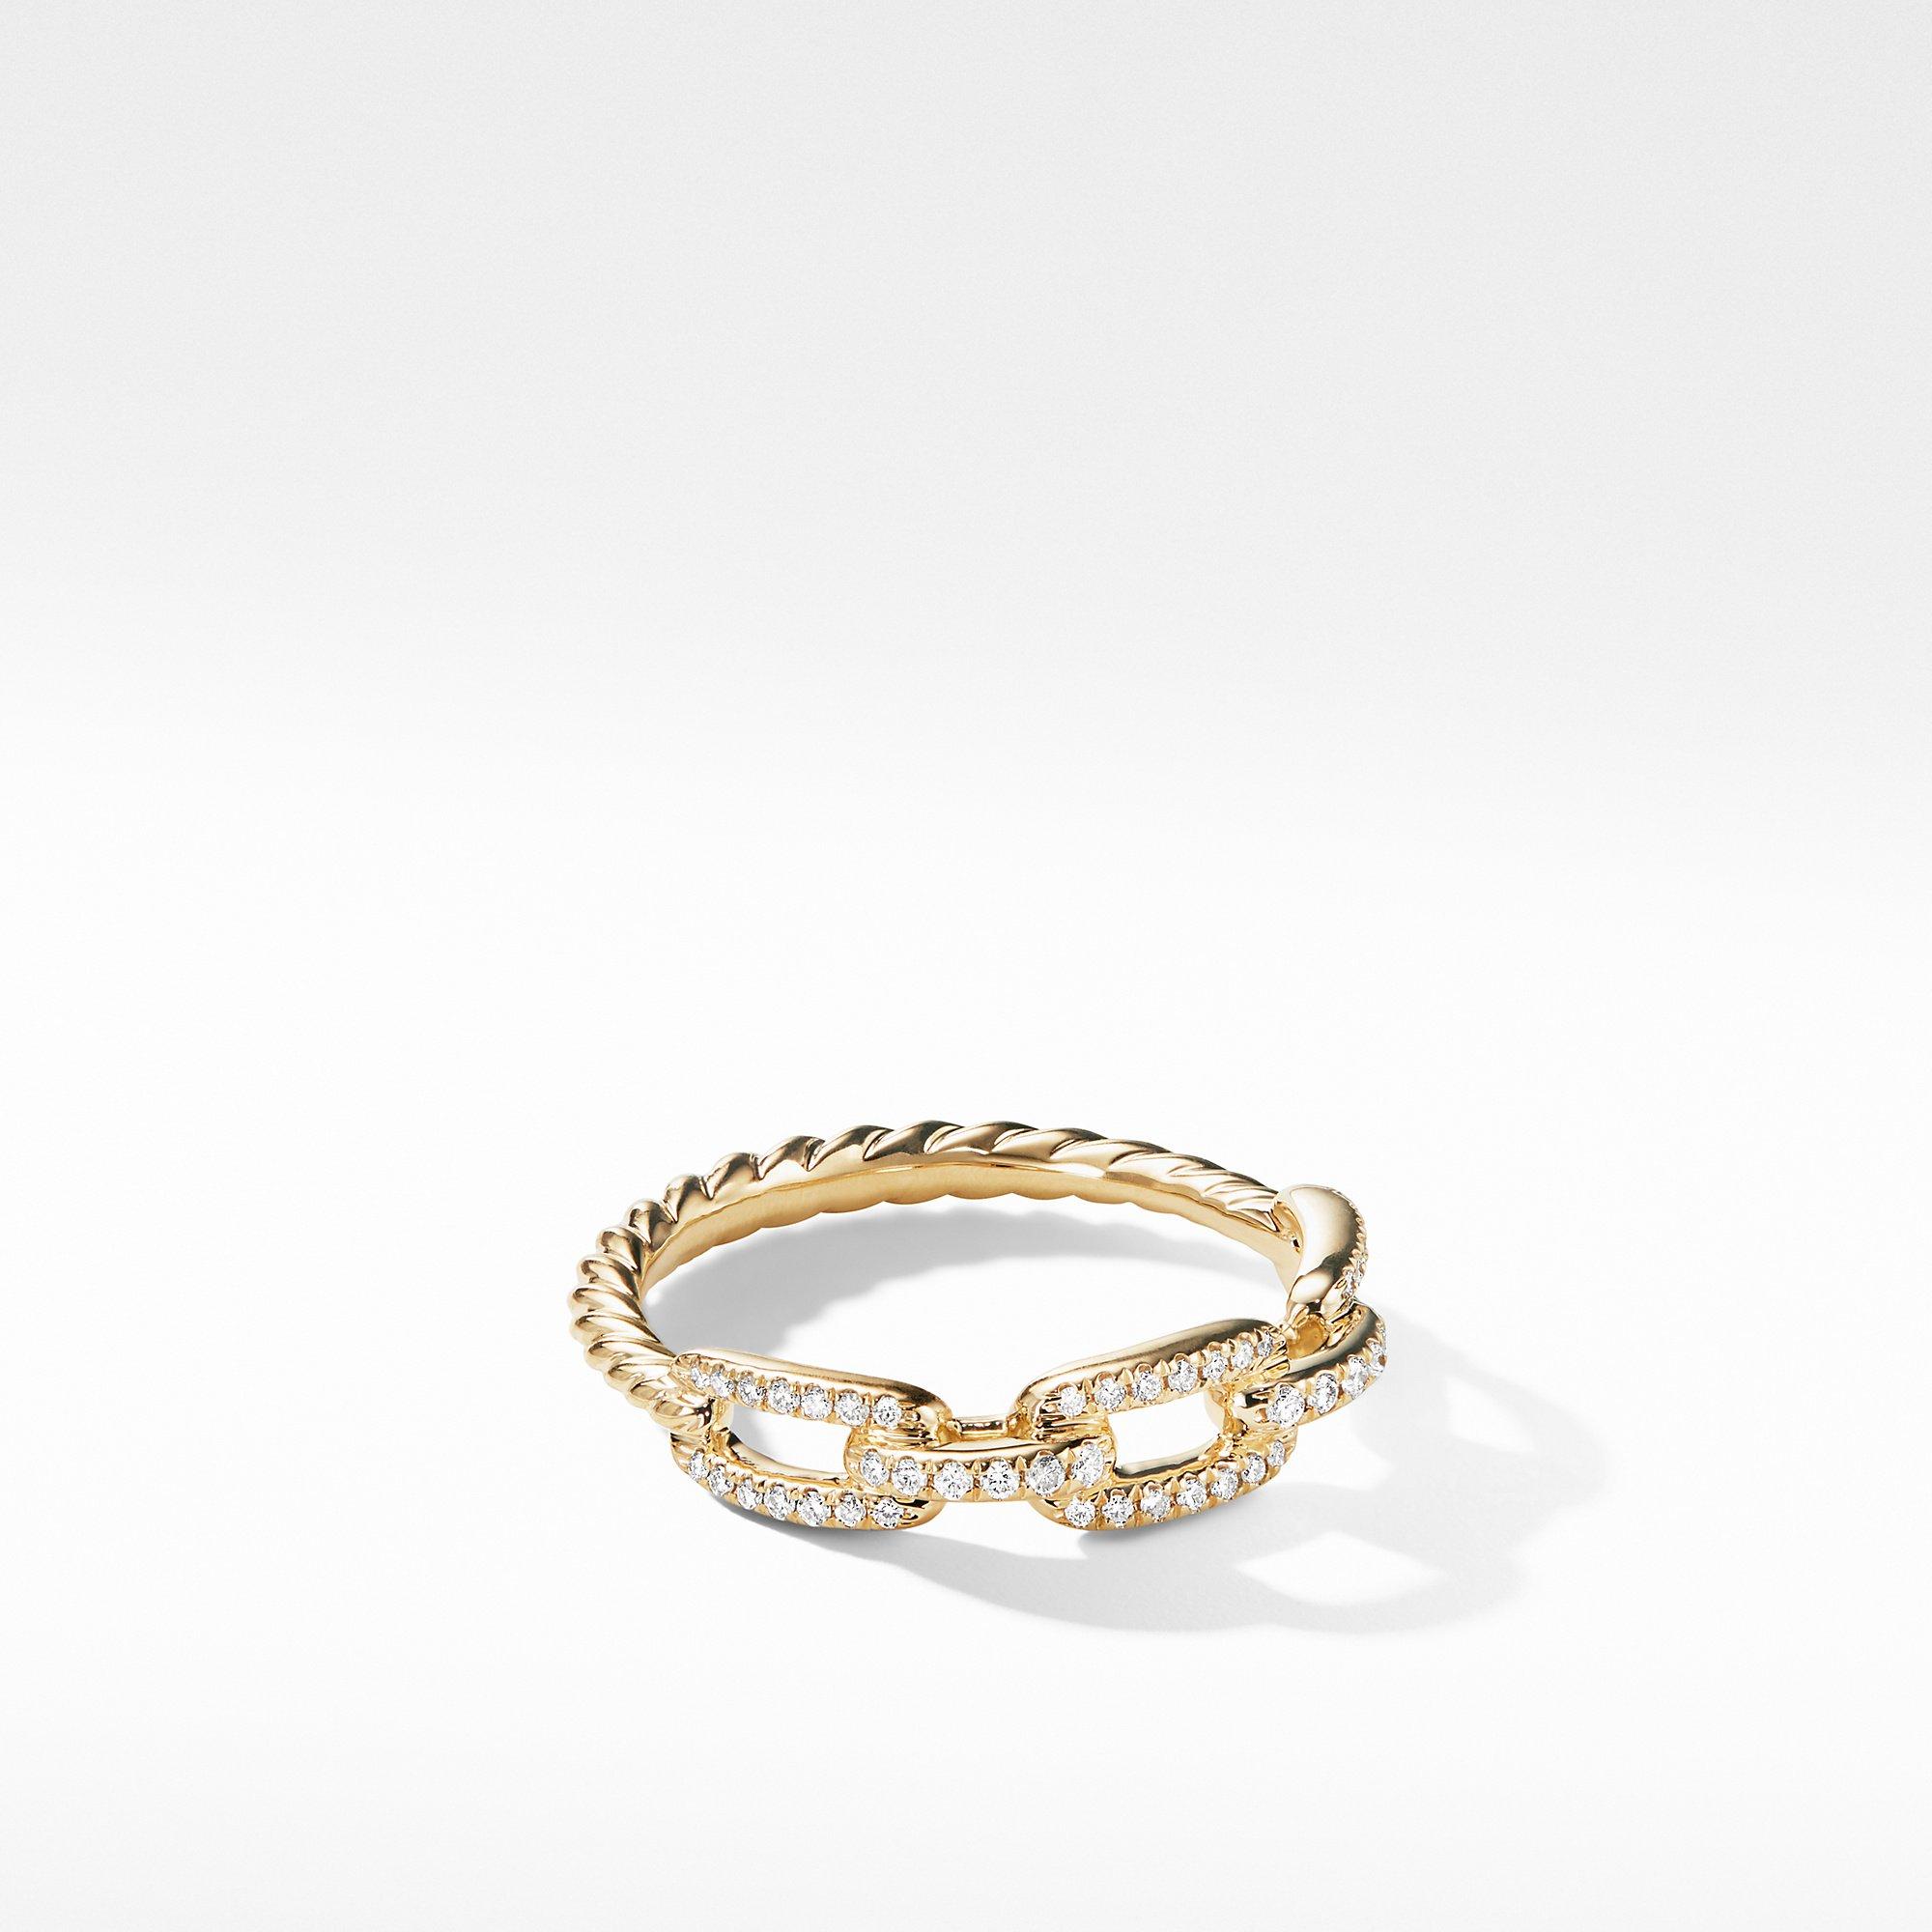 David Yurman Stax Single Row Pave Chain Link Ring with Diamonds in Yellow Gold, size 7